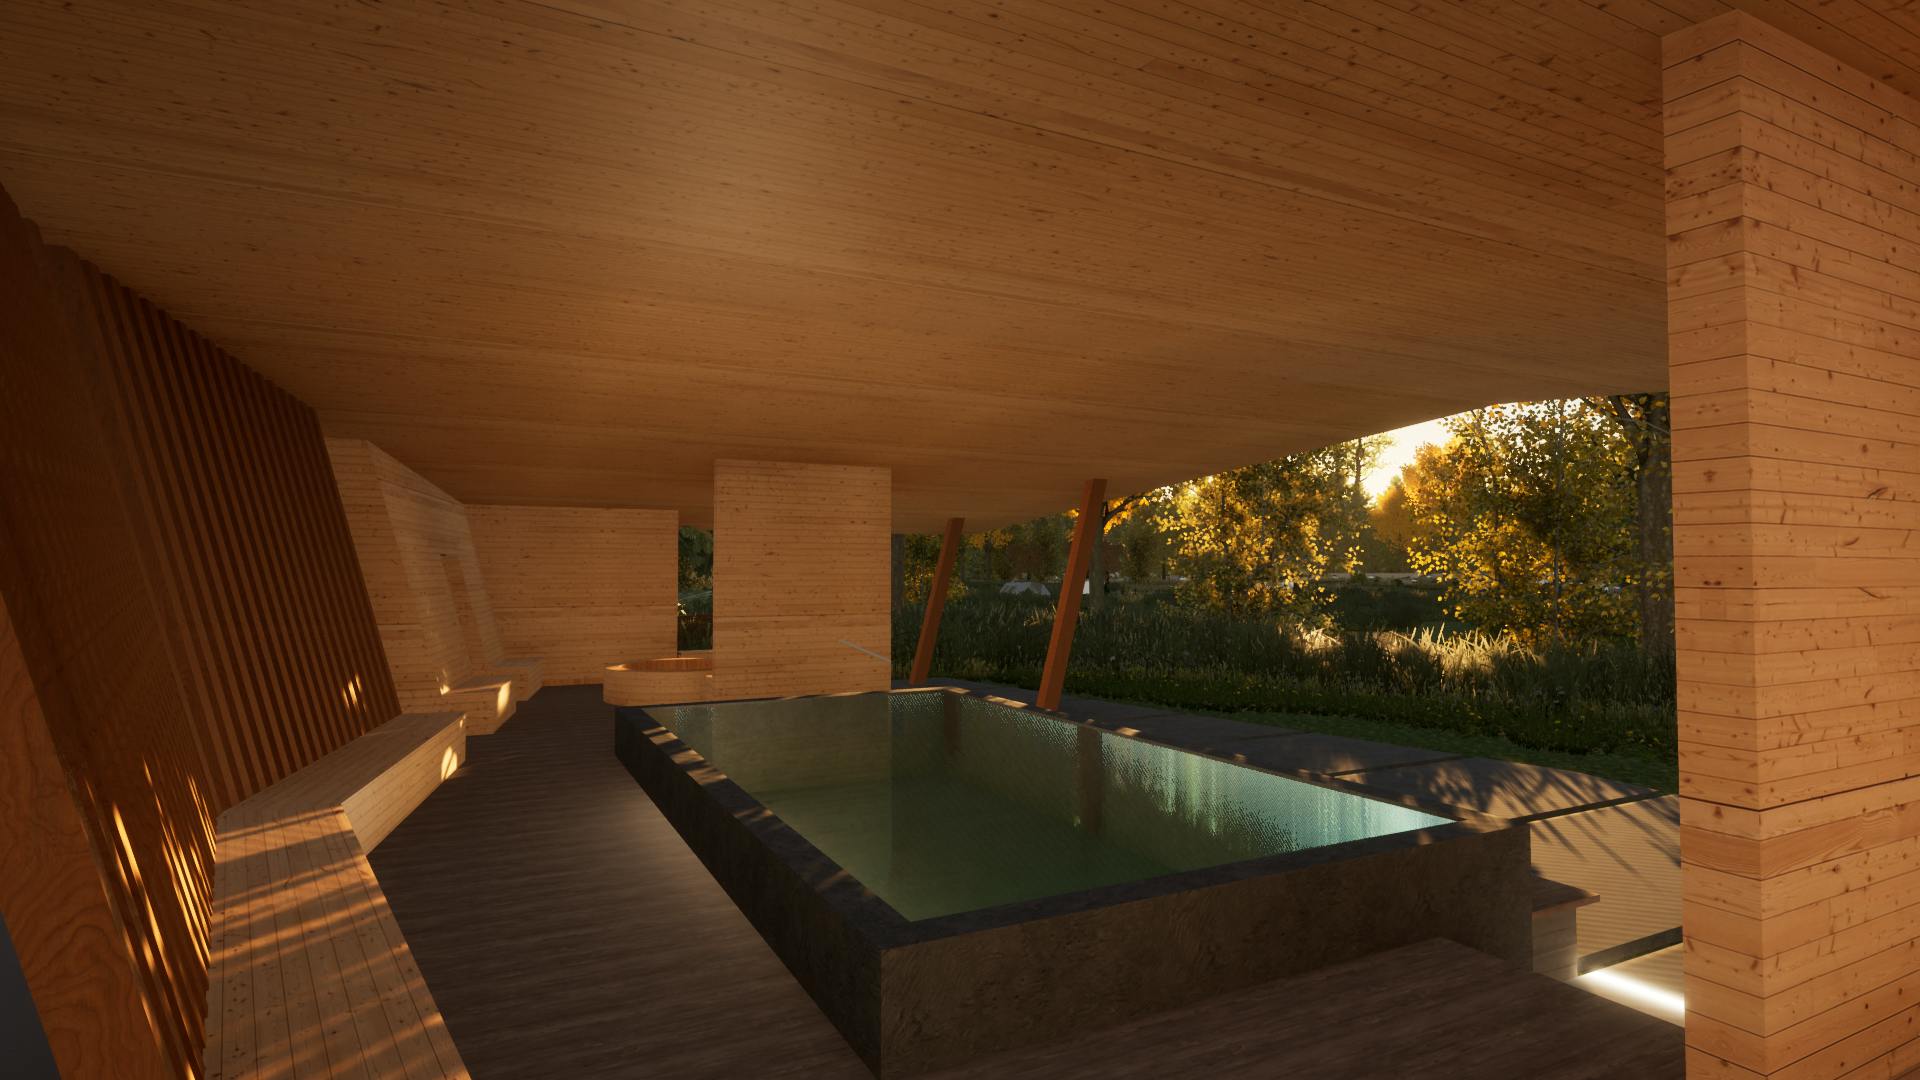 a rendering of the interior of the ofuro building with a pool in the center